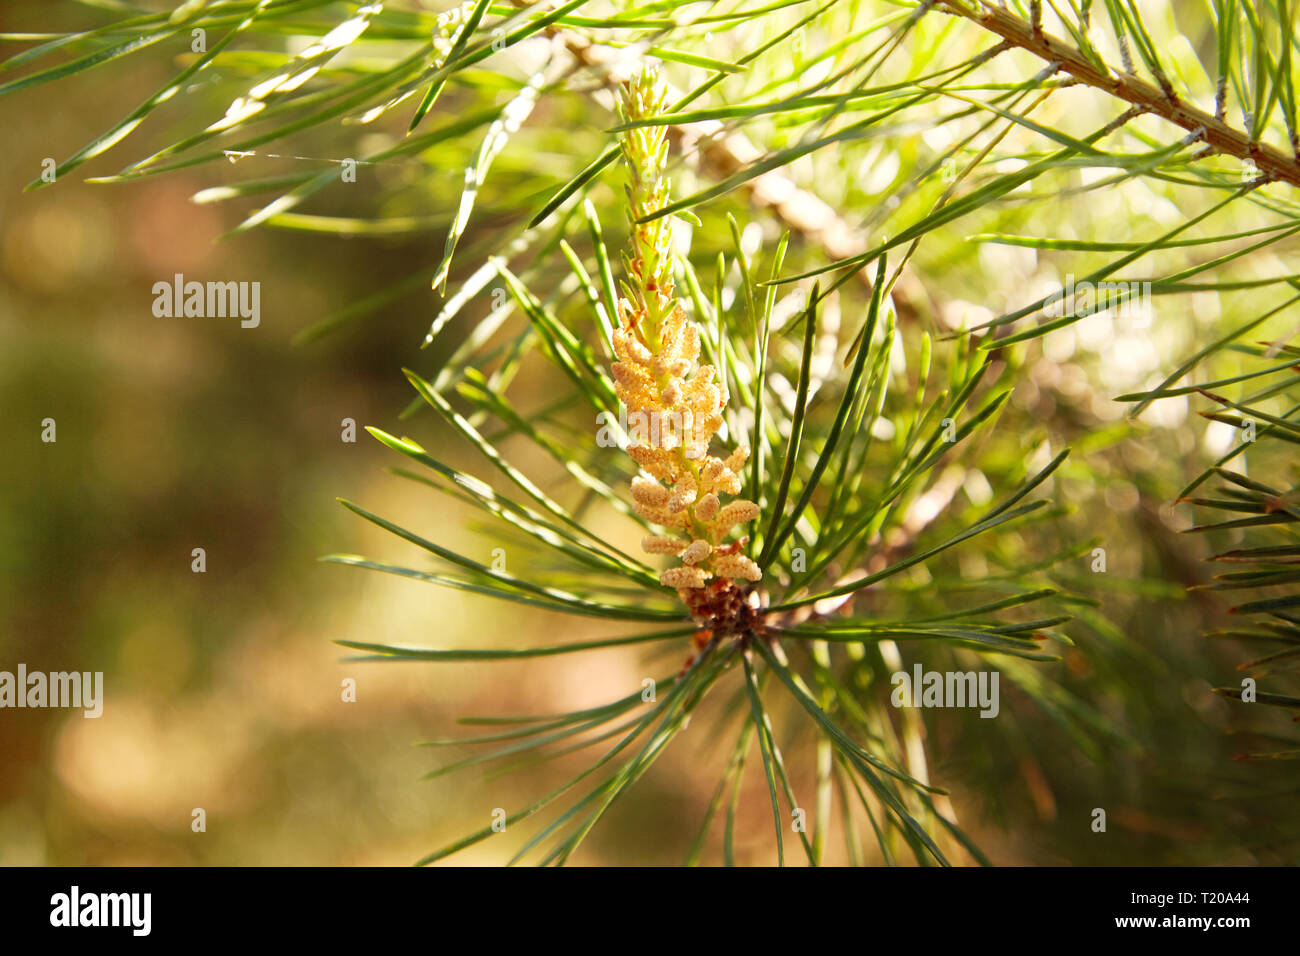 Young pine bud (cone). Pine kidney. Kidney coniferous tree close-up. Stock Photo